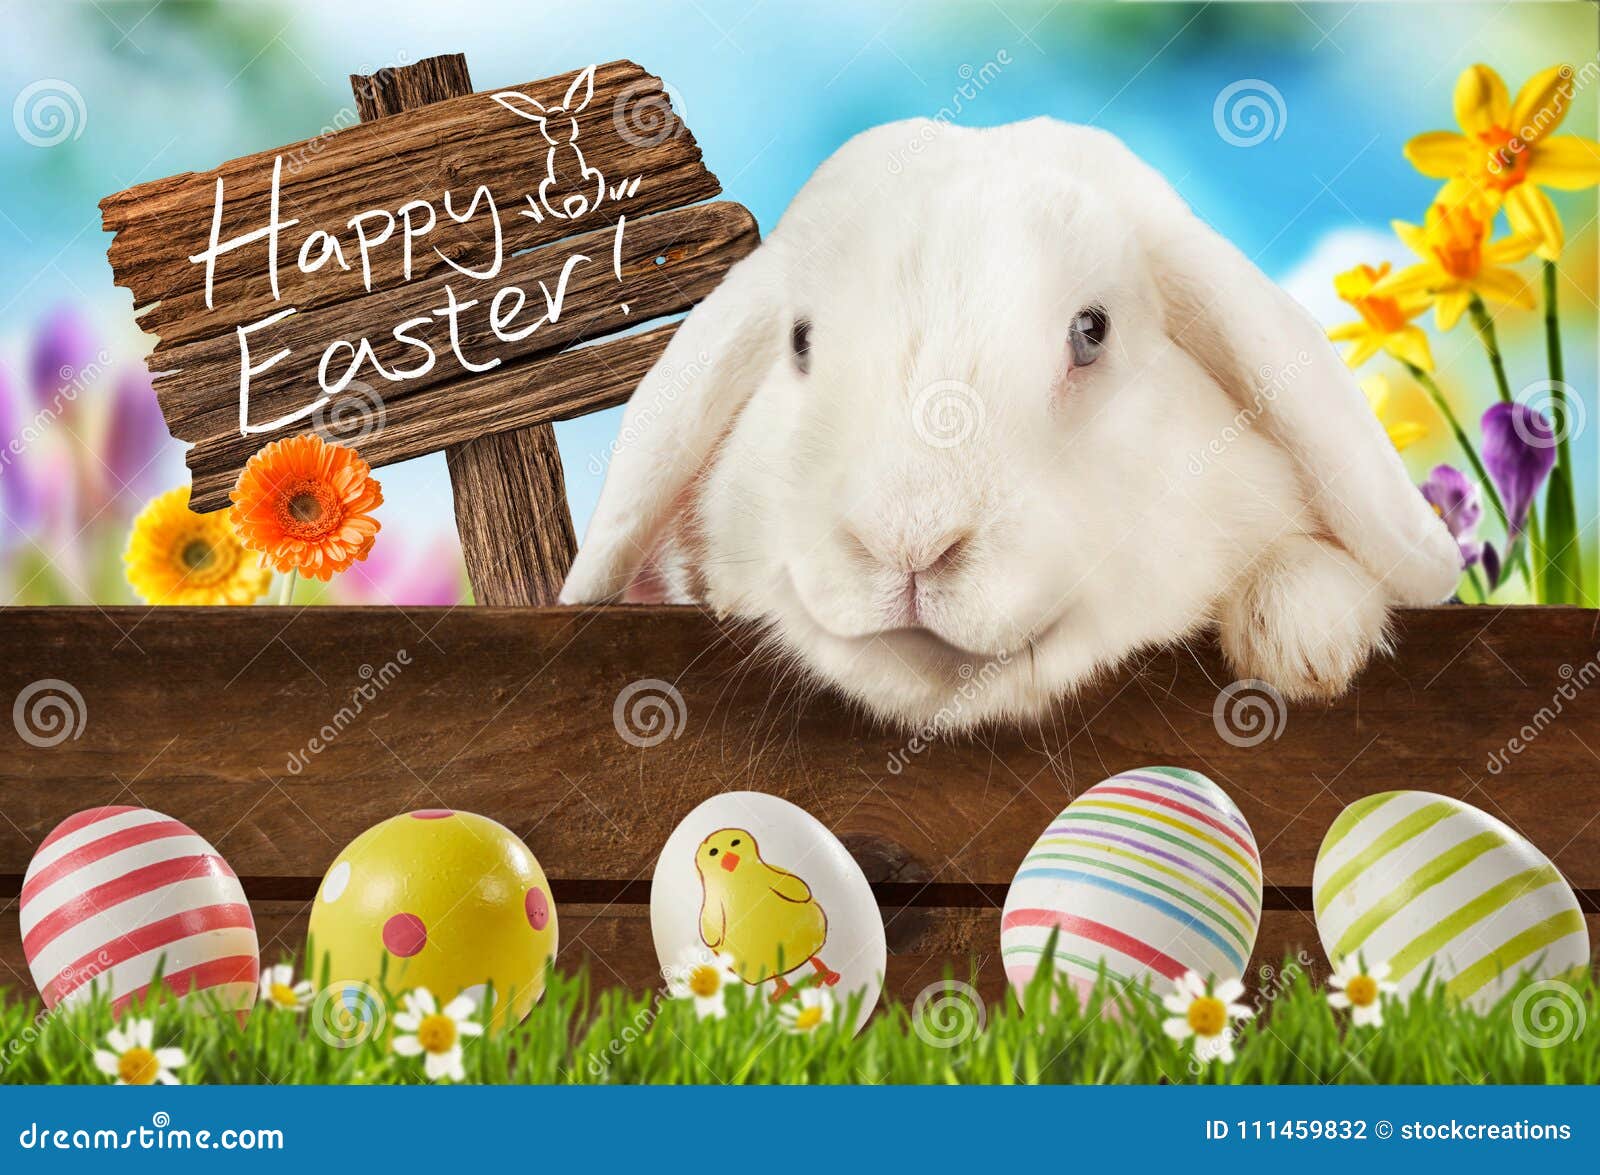 336,821 Happy Easter Stock Photos - Free & Royalty-Free Stock Photos from  Dreamstime